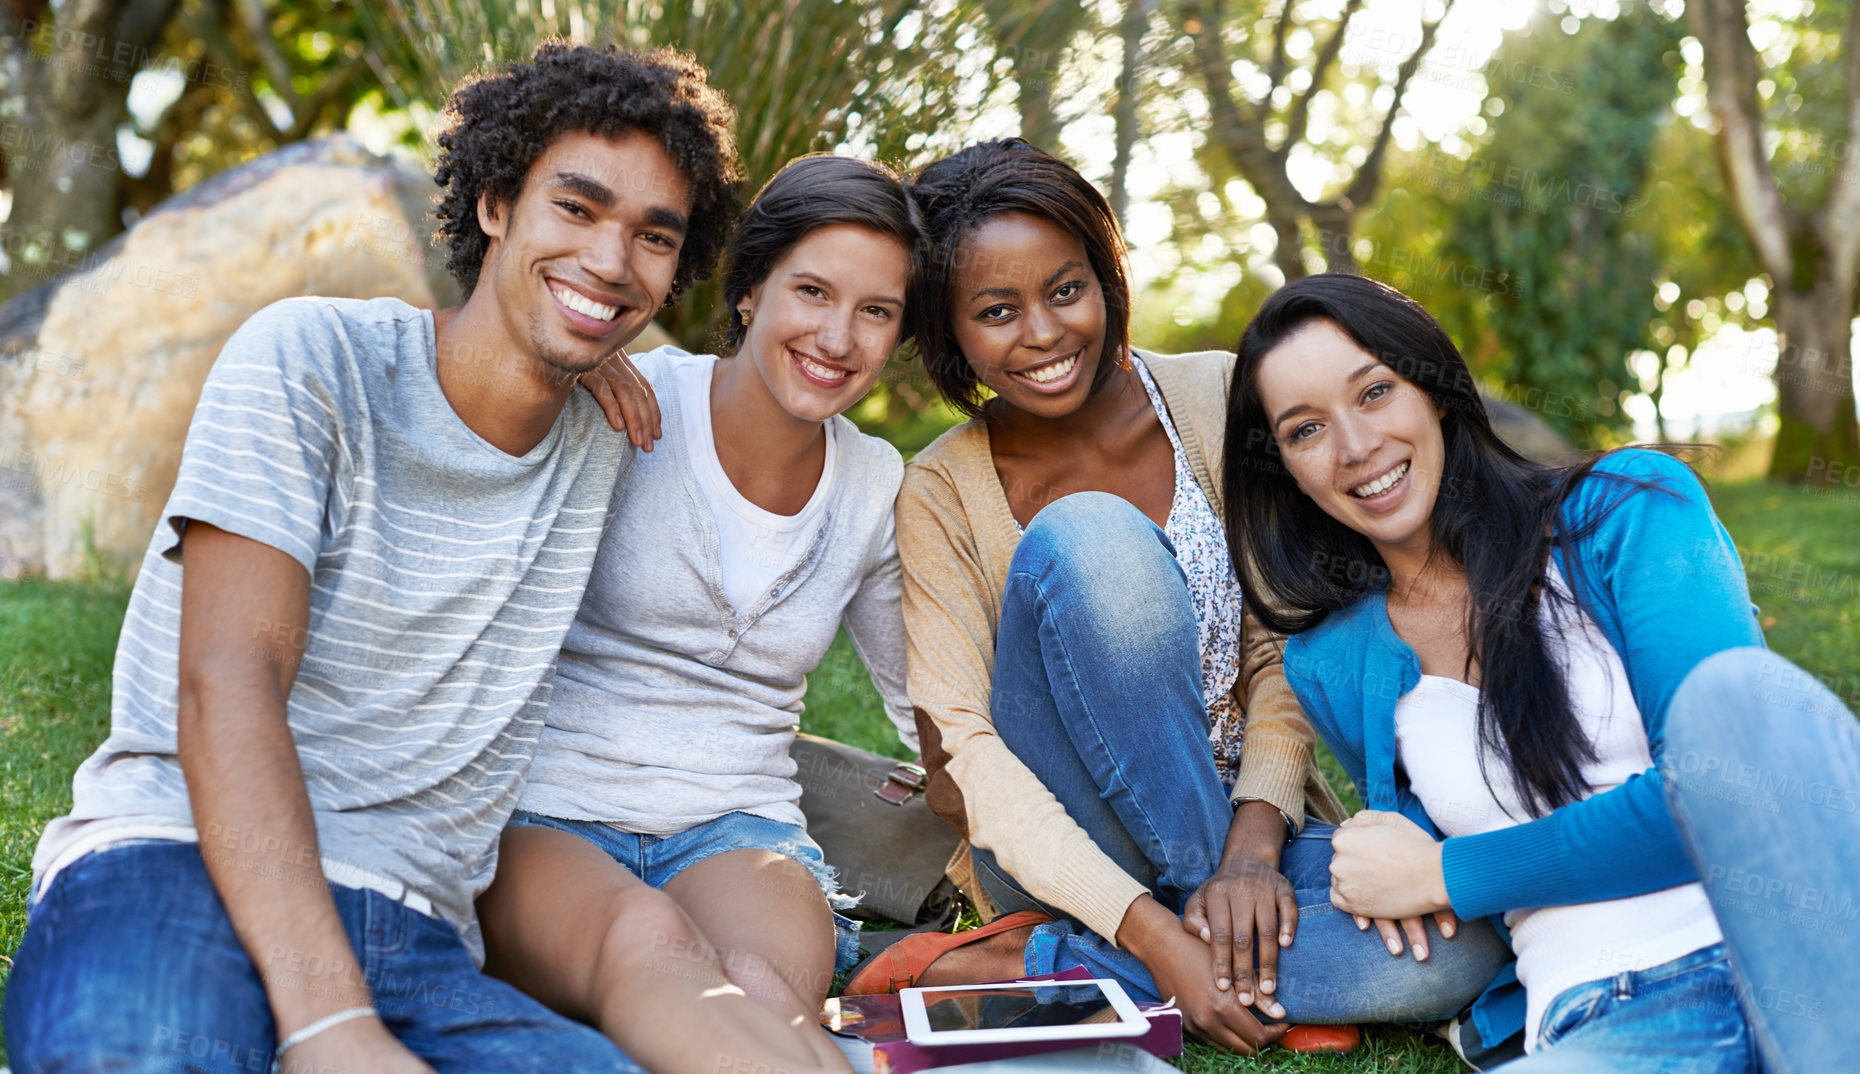 Buy stock photo Shot of a diverse group of college students sitting outside using digital tablet